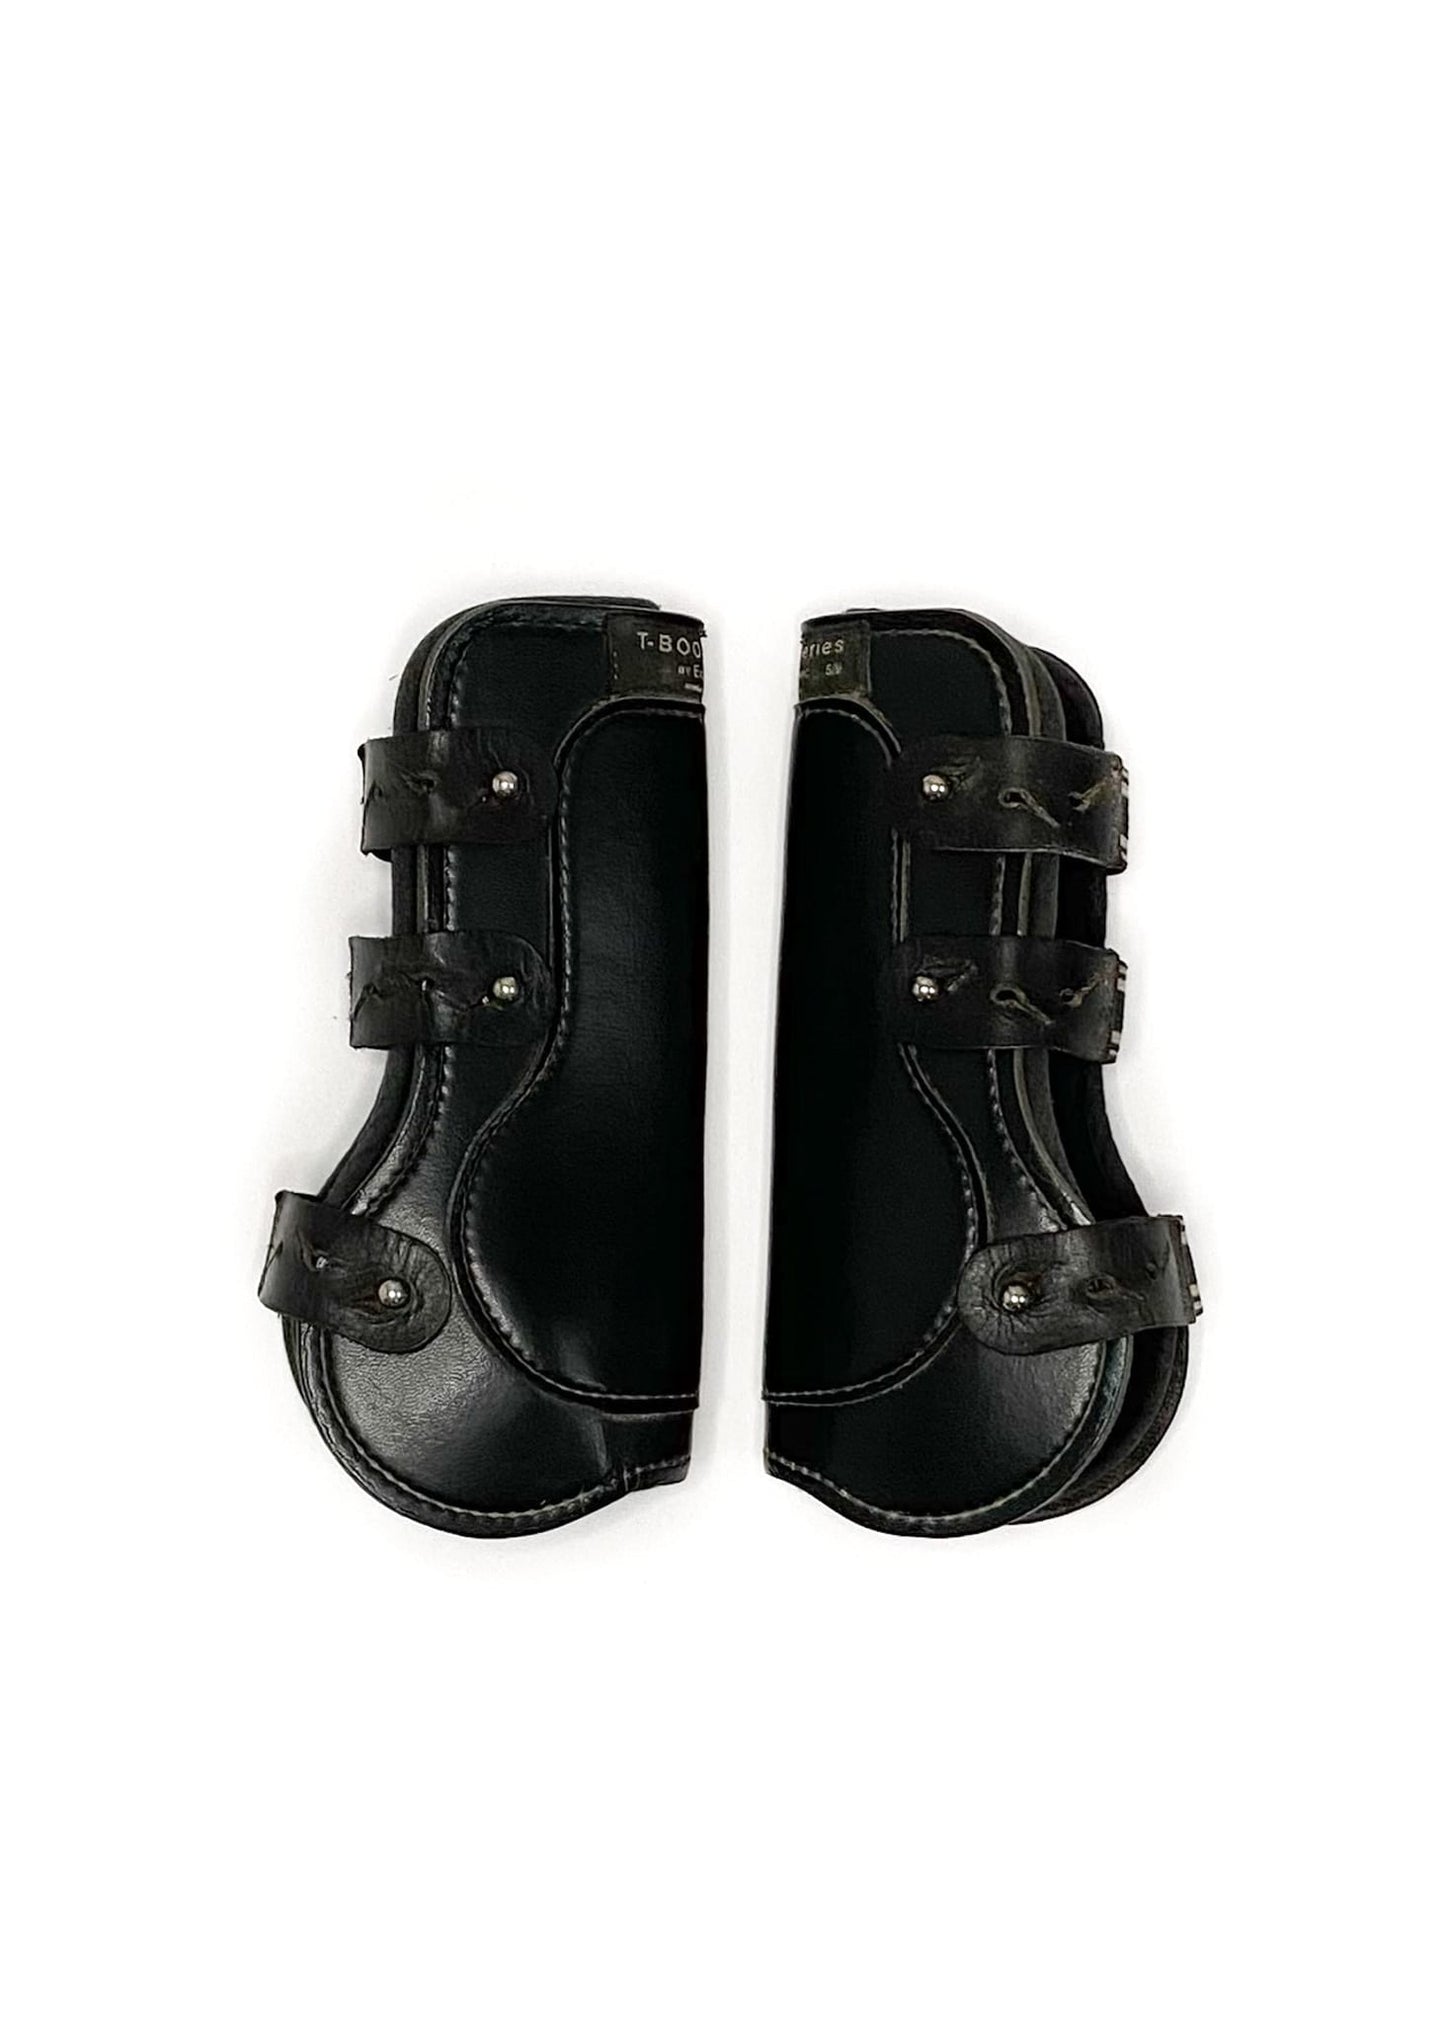 EquiFit T-Boot Front Boots - Black - Small/Medium